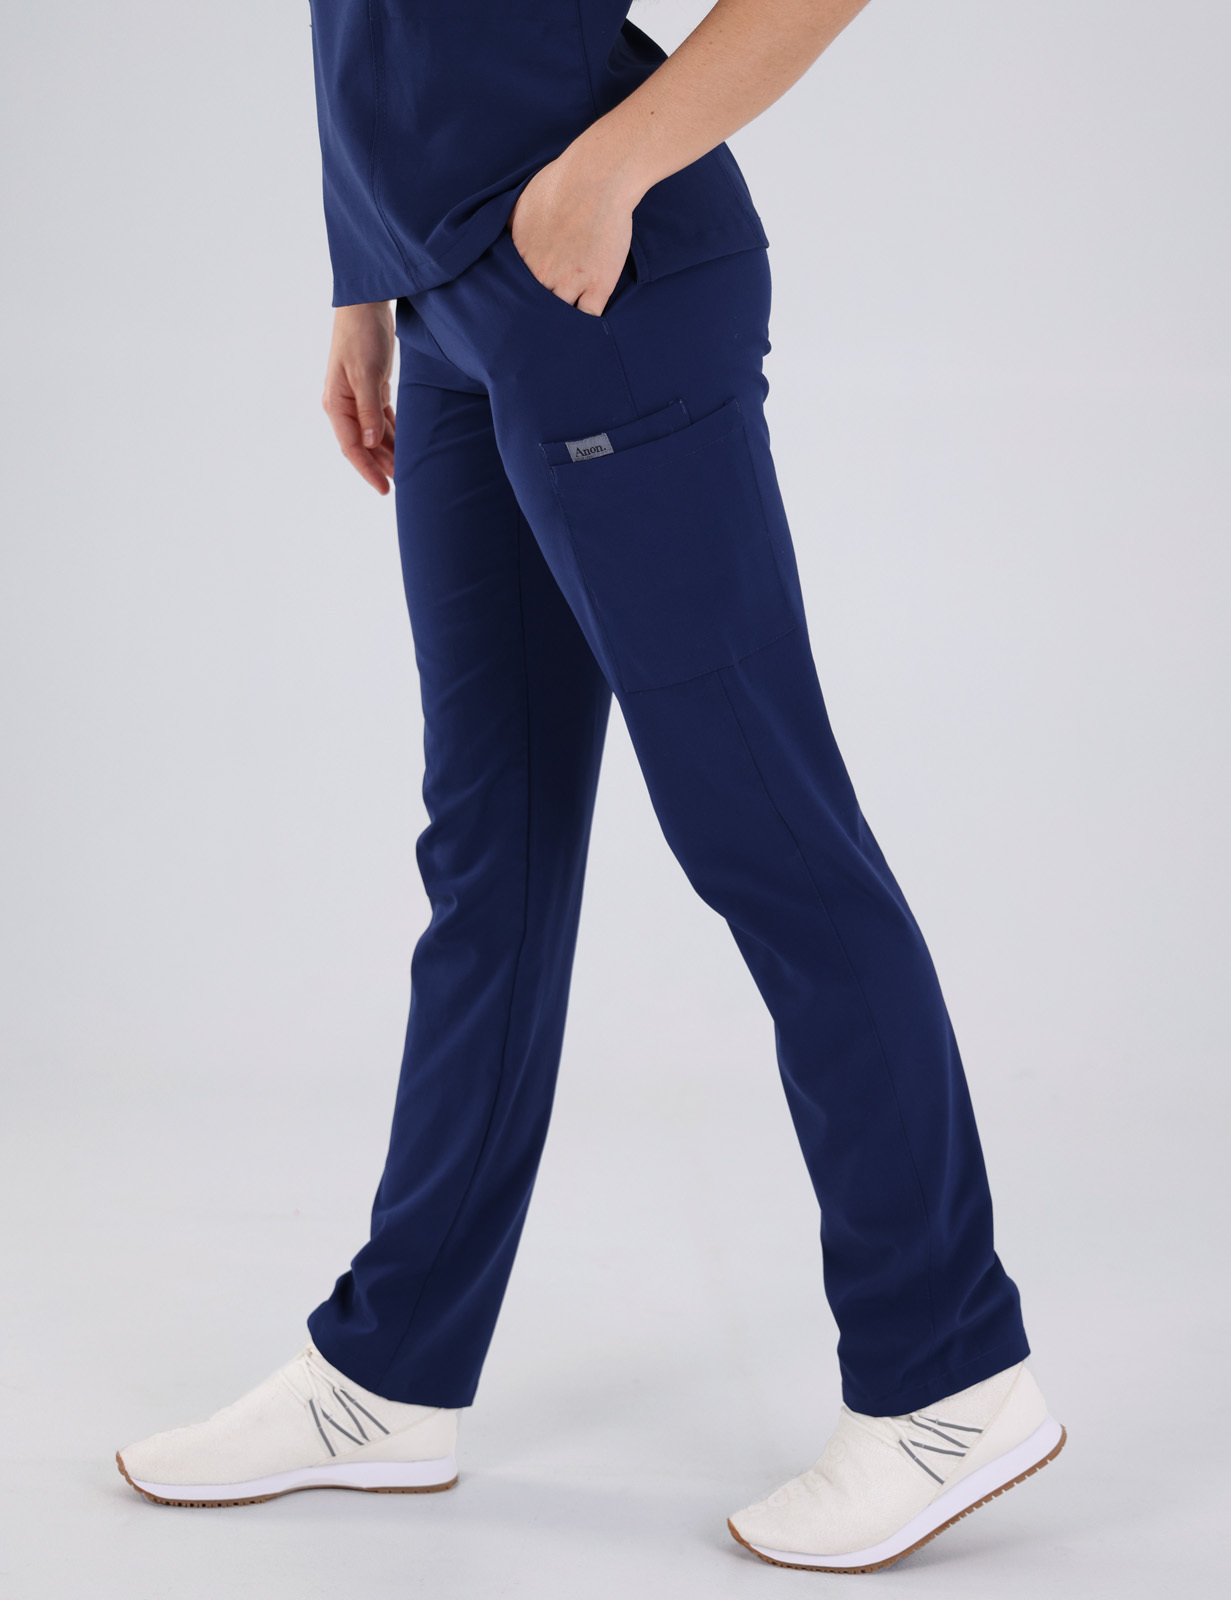 Anon Women's Scrub Pants (Whisper Collection) Poly/Spandex - Midnight Blue - XX Small